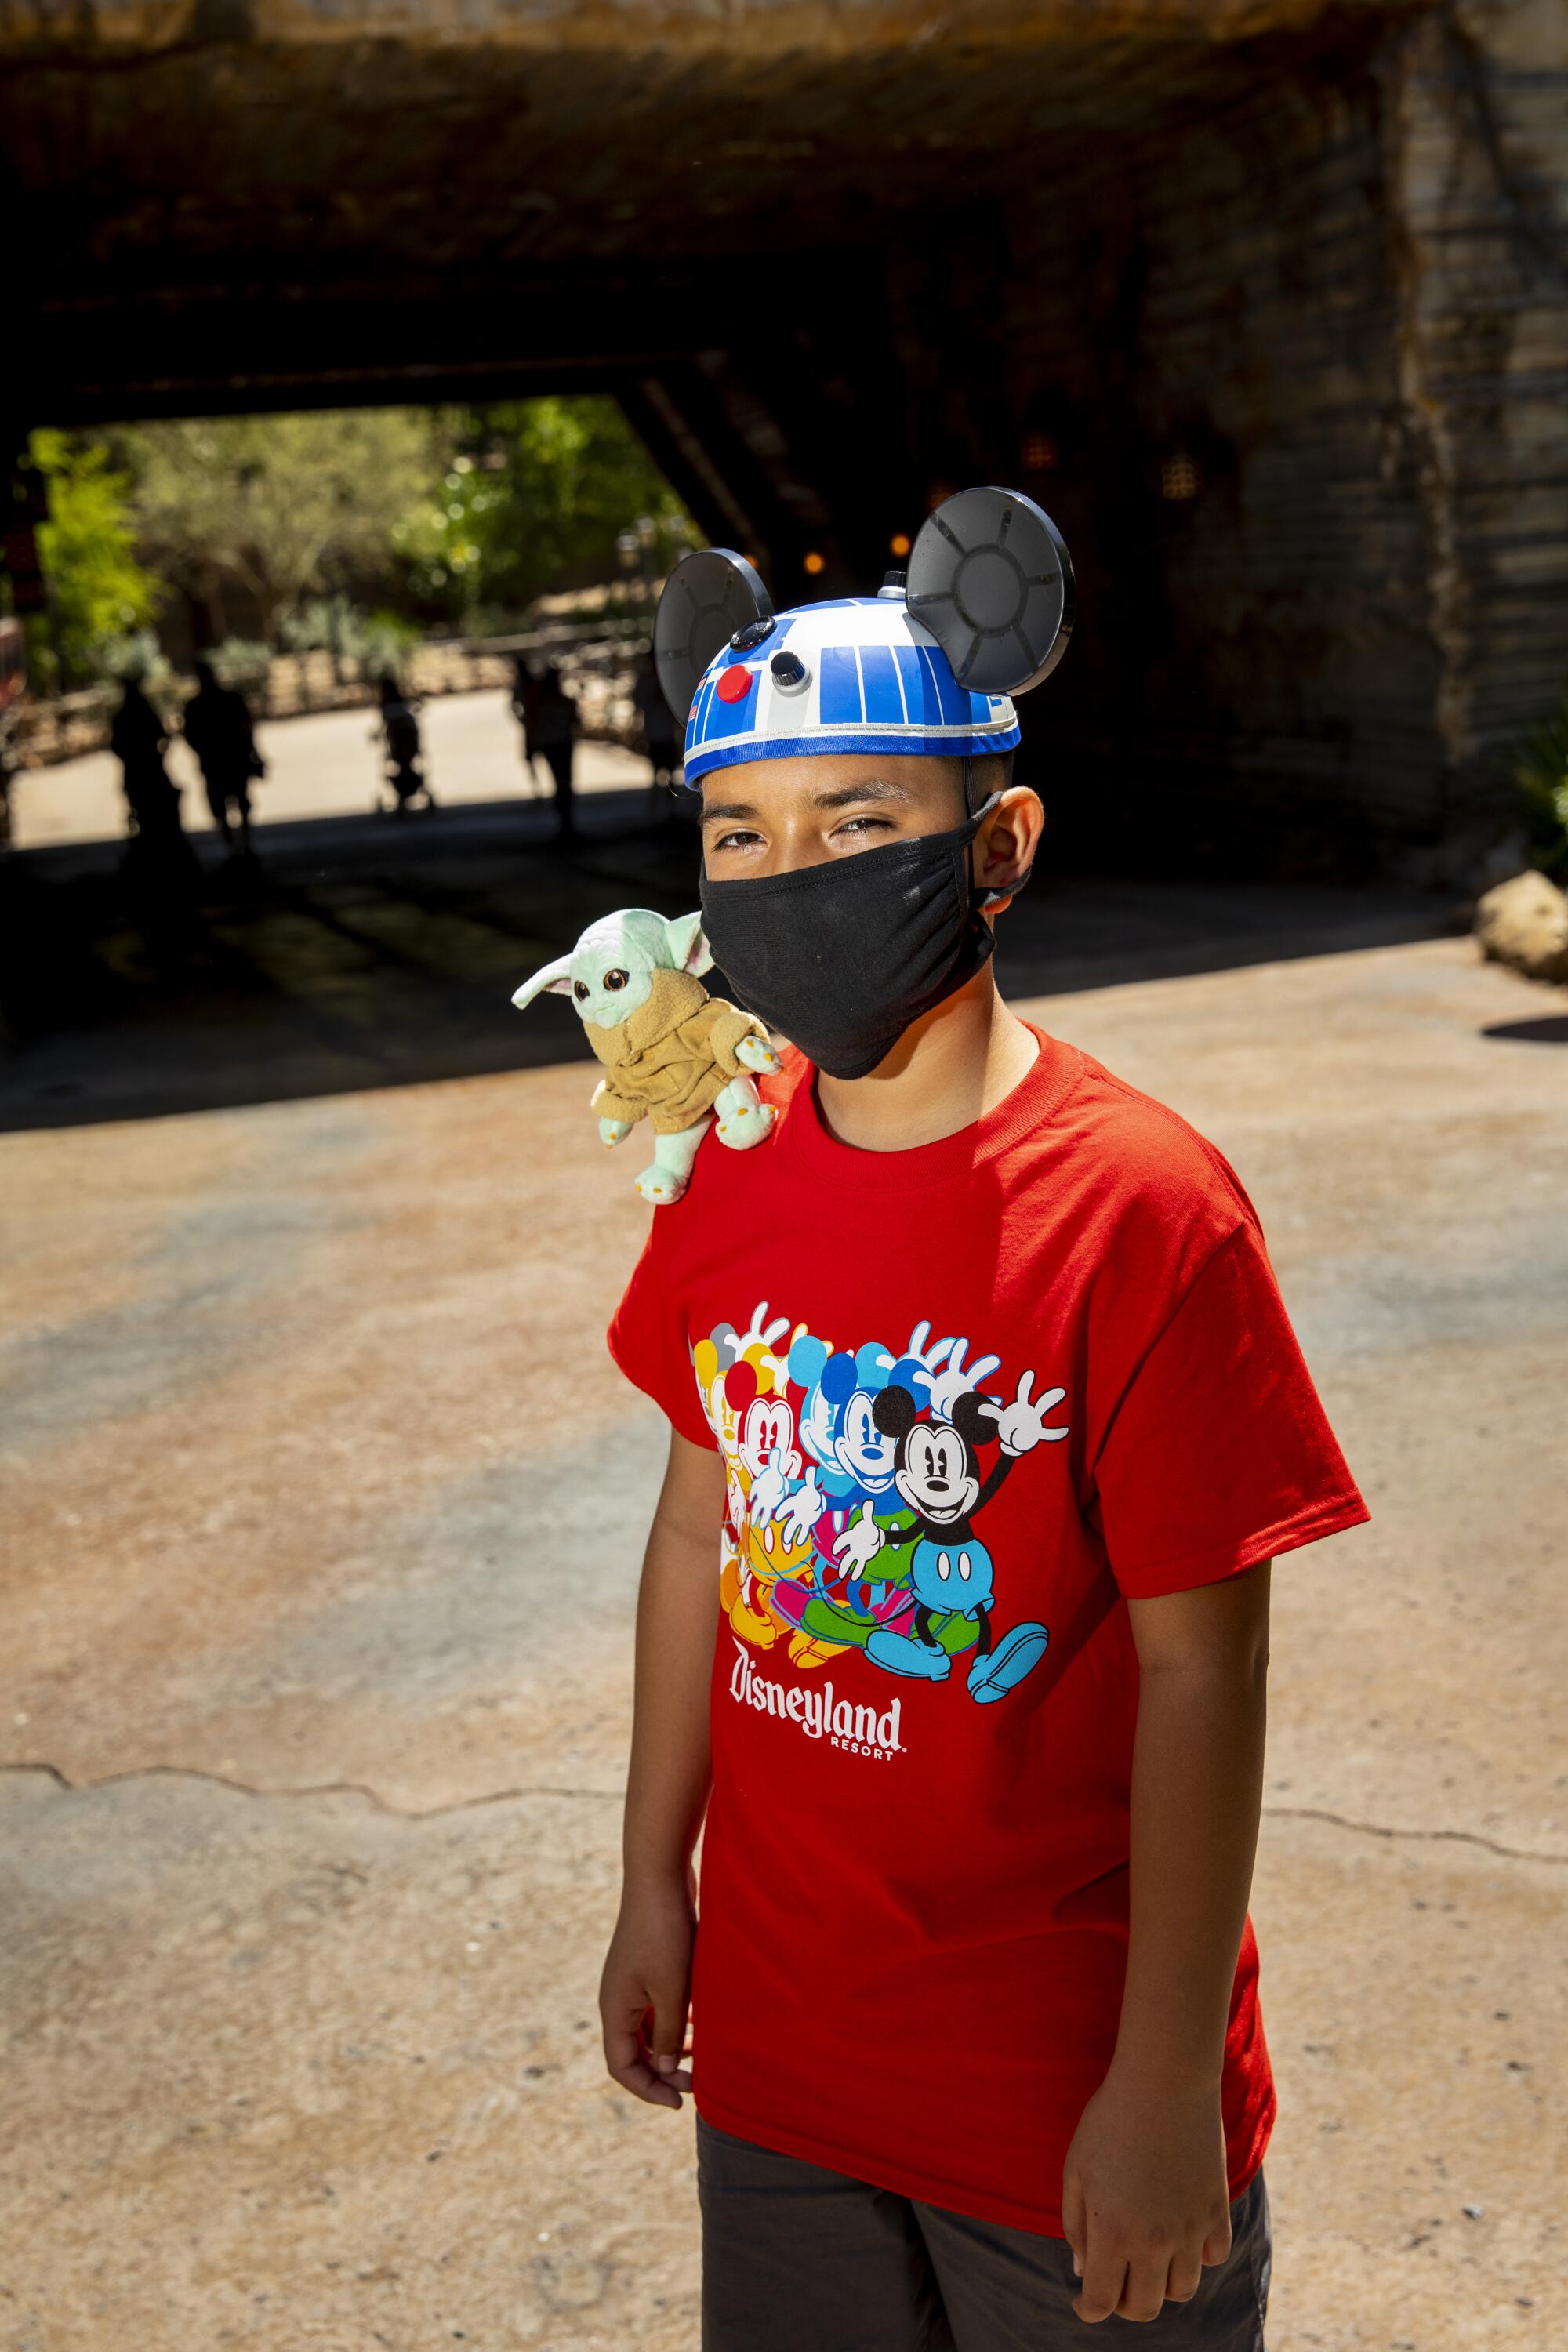 A boy in a Disneyland shirt and R2-D2 hat has a baby Yoda on his shoulder